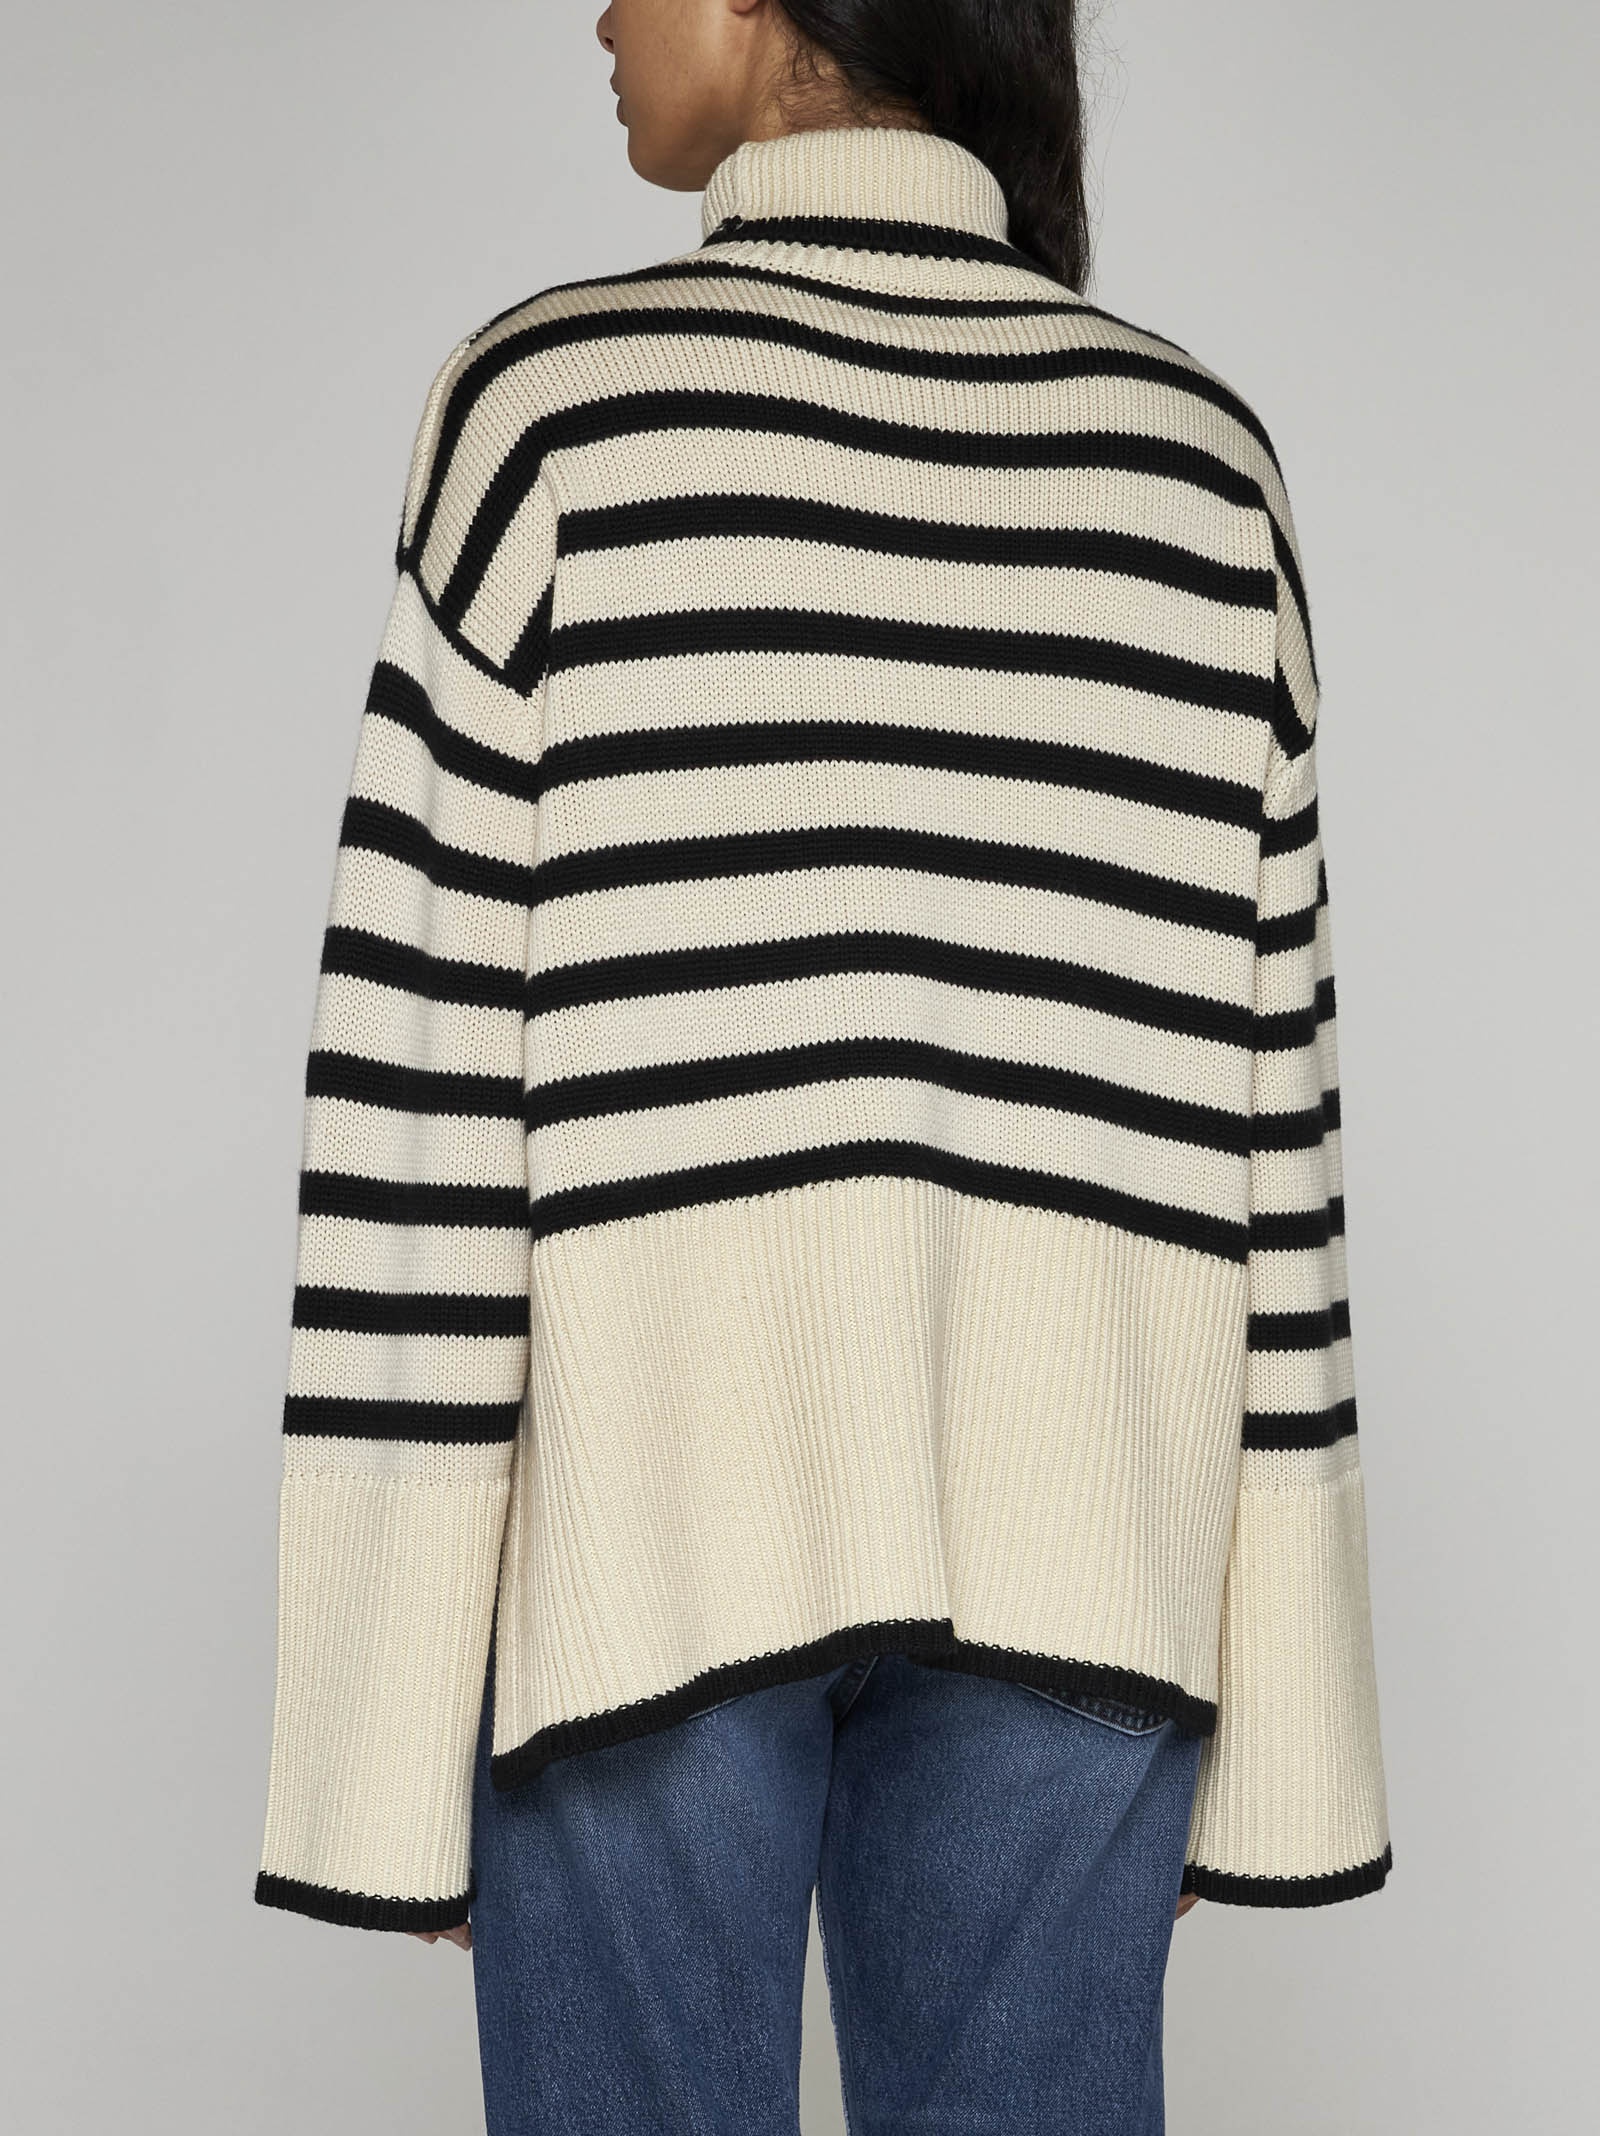 Striped wool and cotton turtleneck - 4